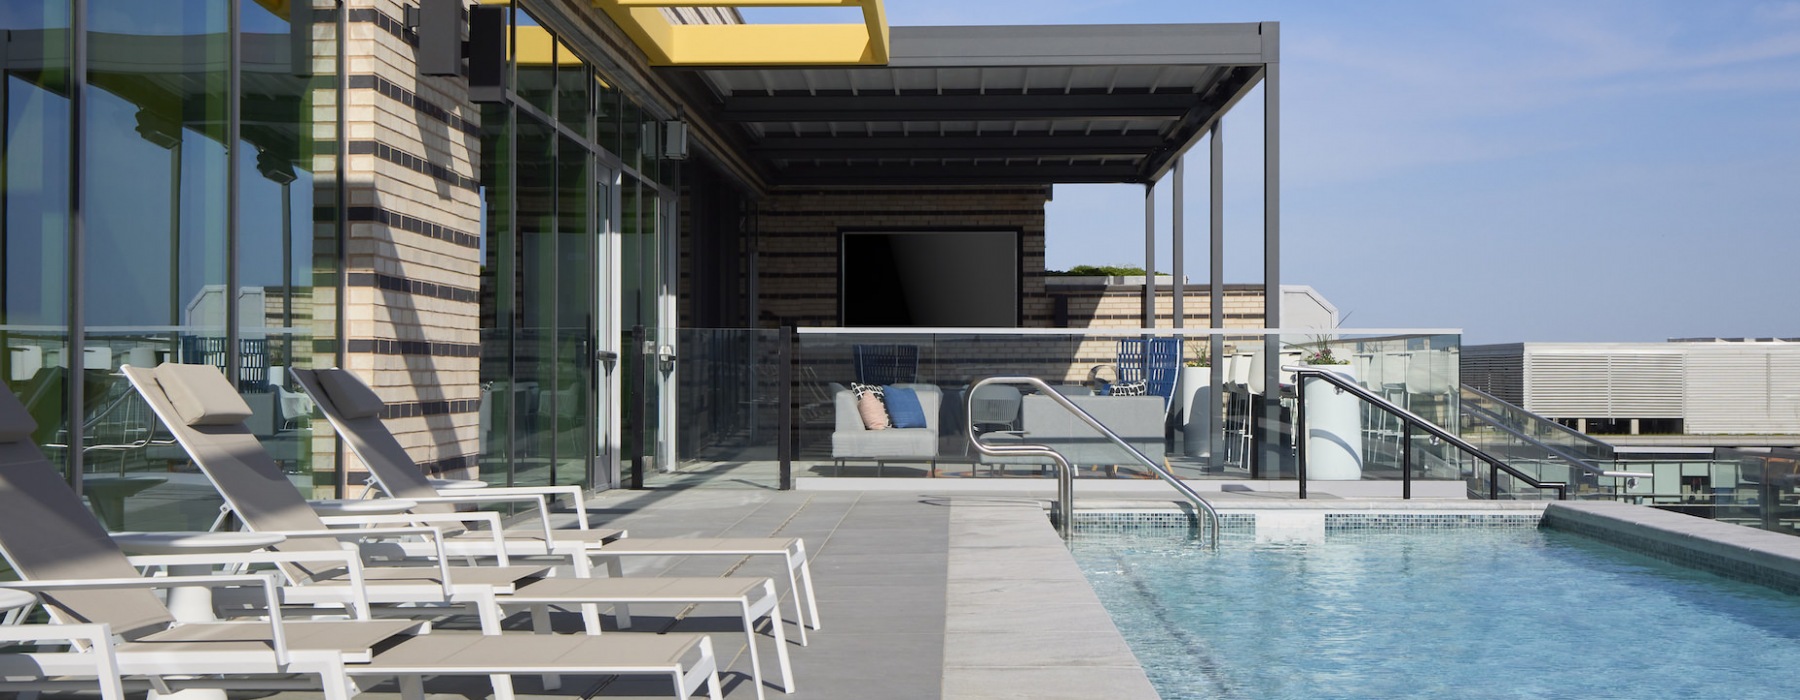 Rooftop pool with seating terrace and views 